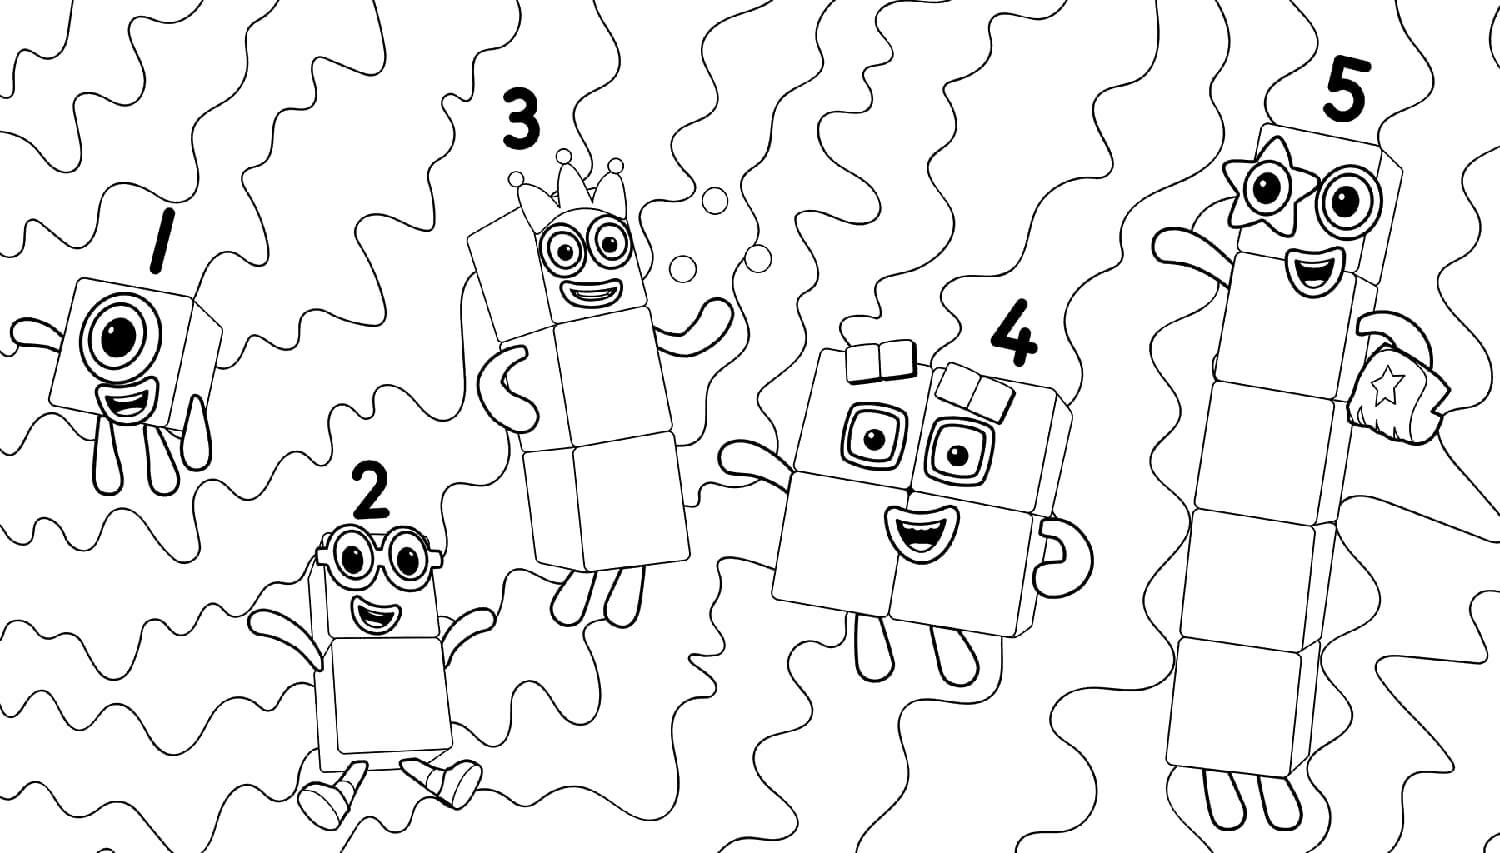 Numberblocks Coloring Pages - Free Printable Coloring Pages for Kids